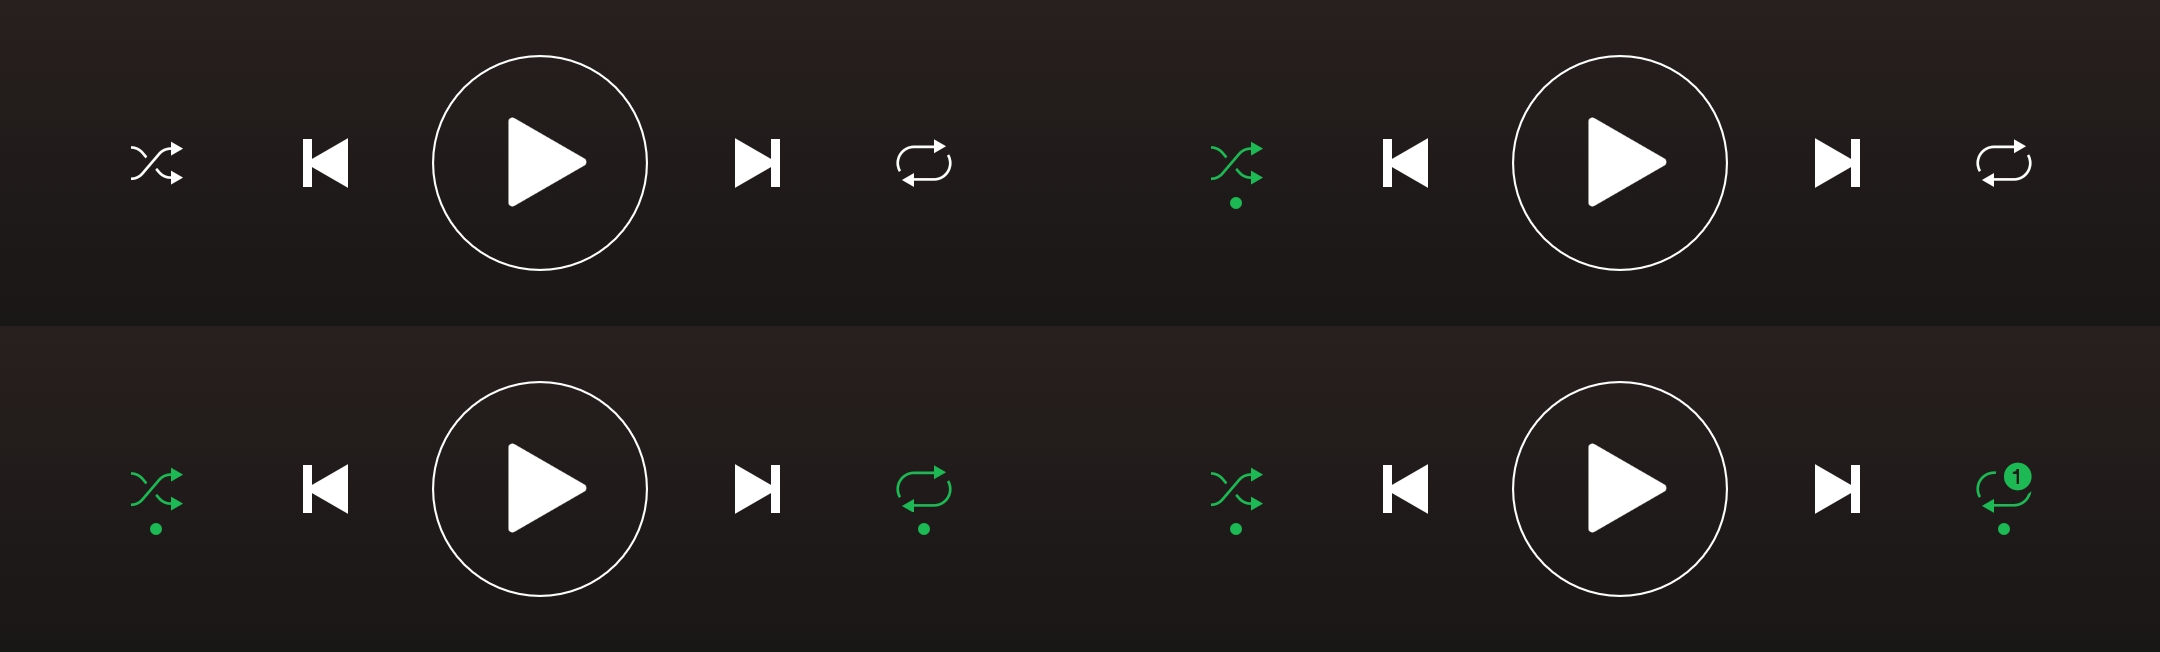 Spotify Shuffle and Repeat Buttons   We are Colorblind